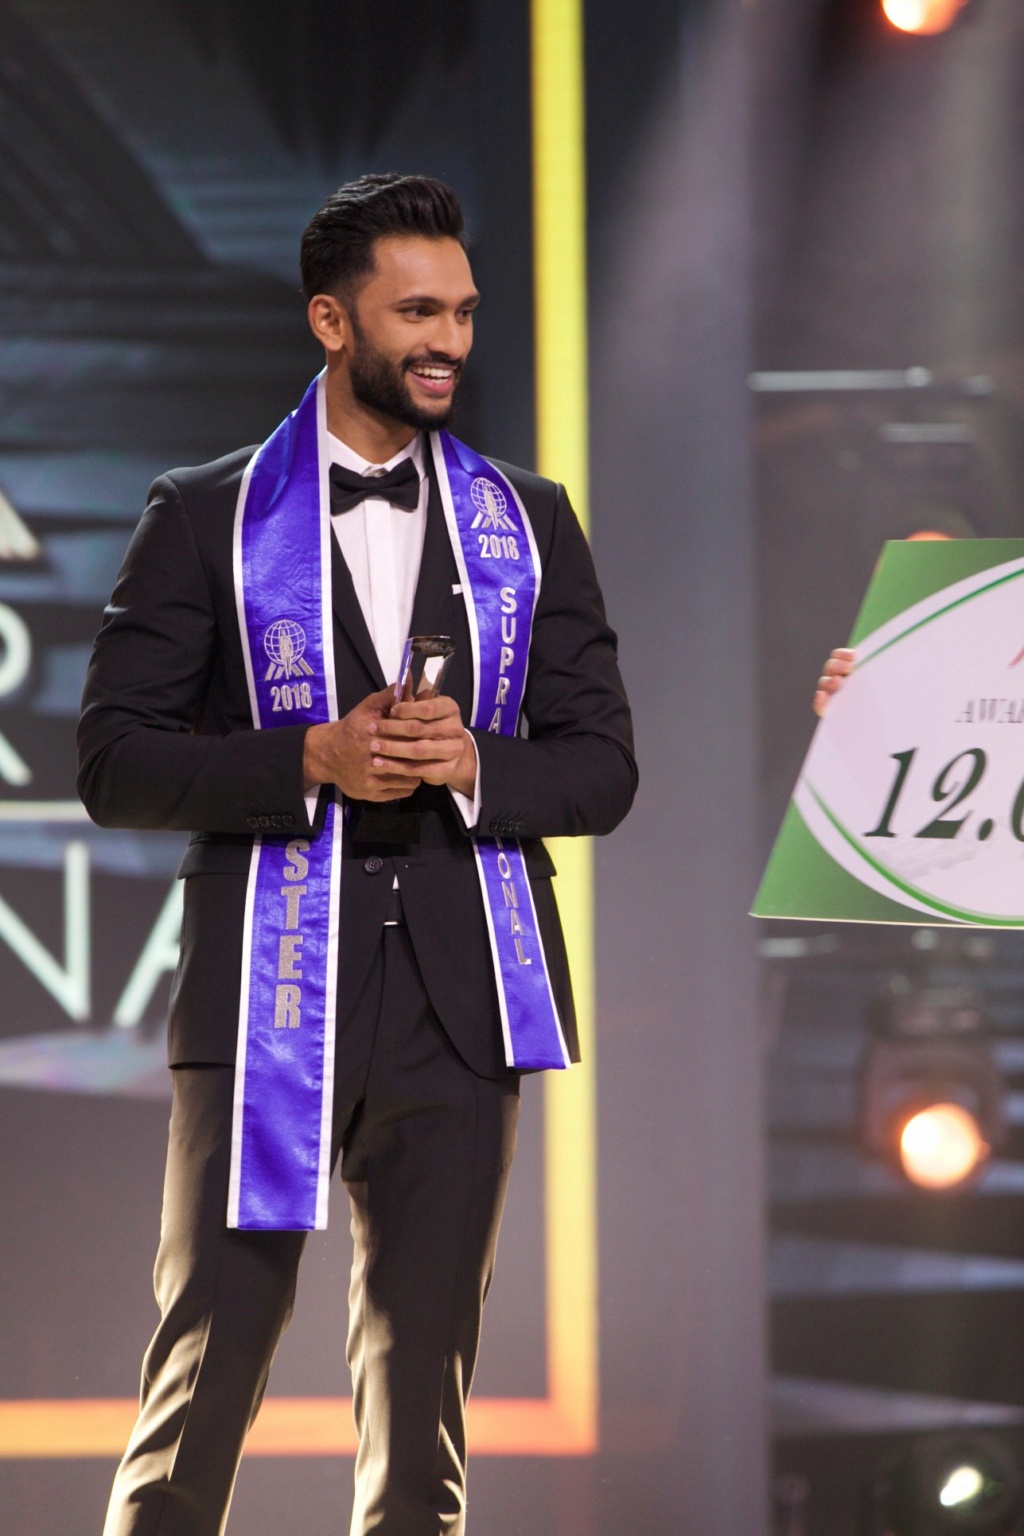 ⚛️⚛️⚛️⚛️⚛️ MISTER SUPRANATIONAL IN HISTORY ⚛️⚛️⚛️⚛️⚛️ 48212010